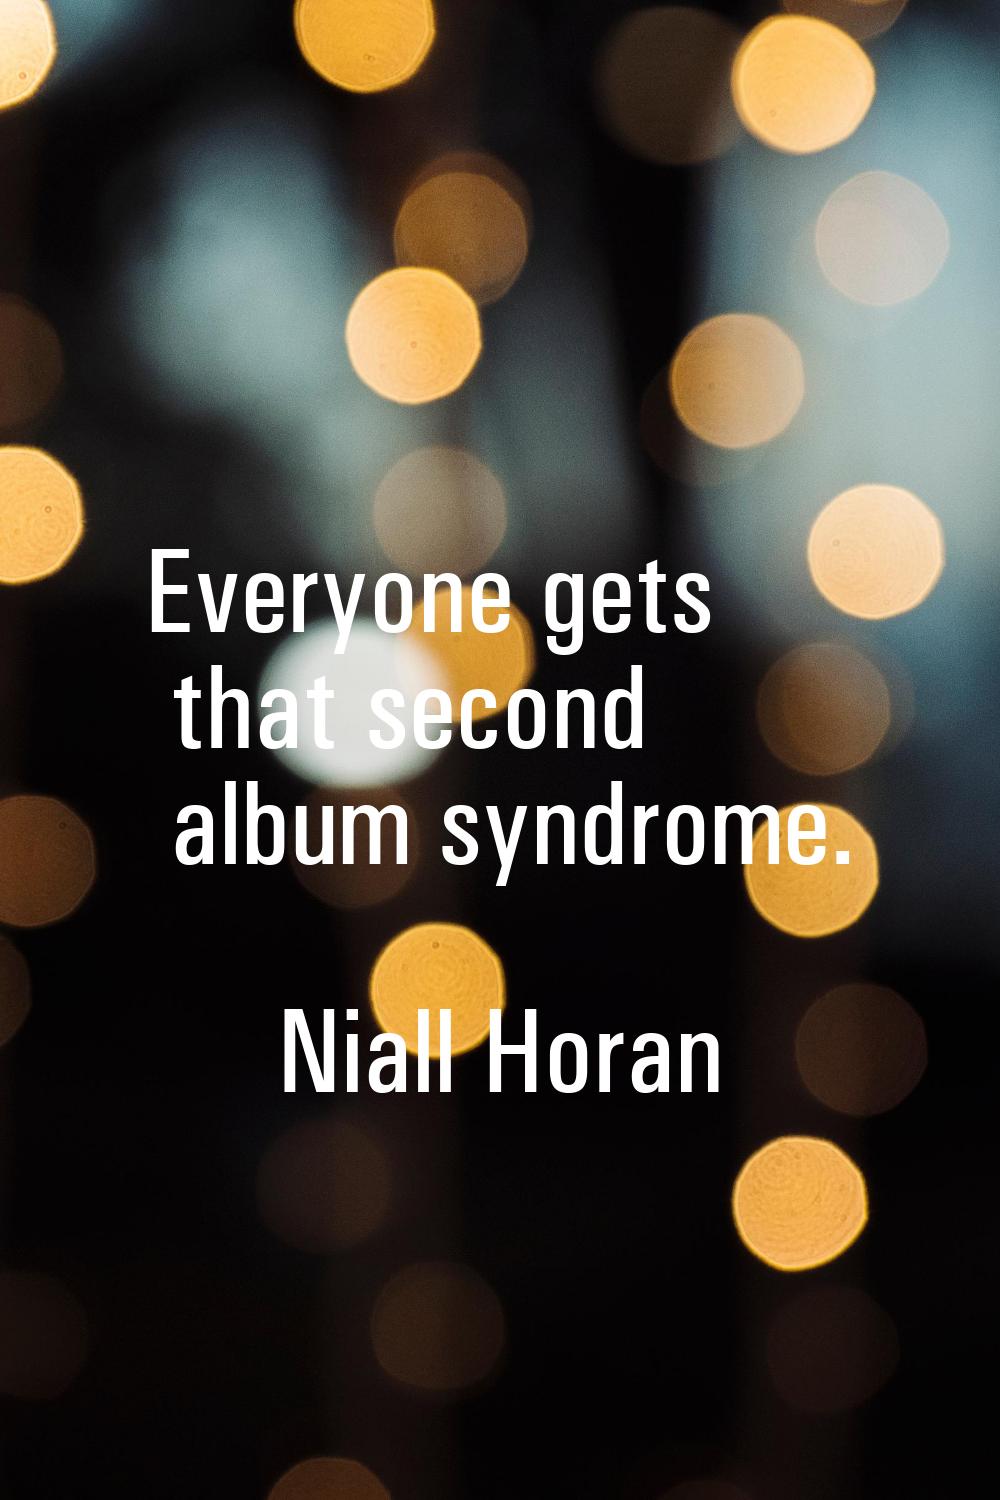 Everyone gets that second album syndrome.